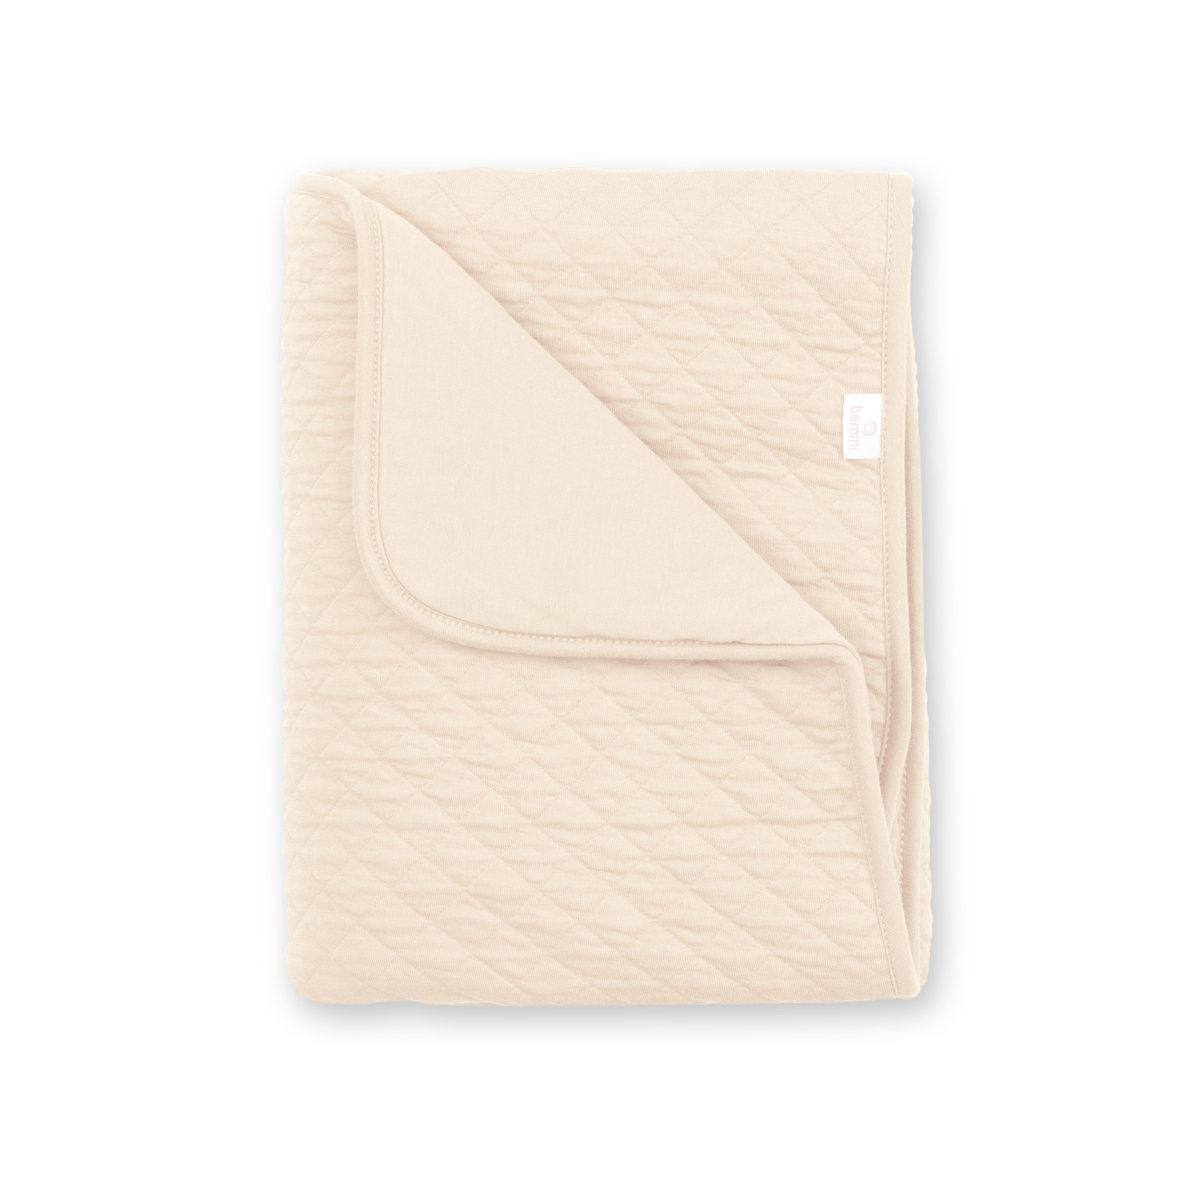 Blanket Pady quilted + jersey 75x100cm QUILT Cream tog 3